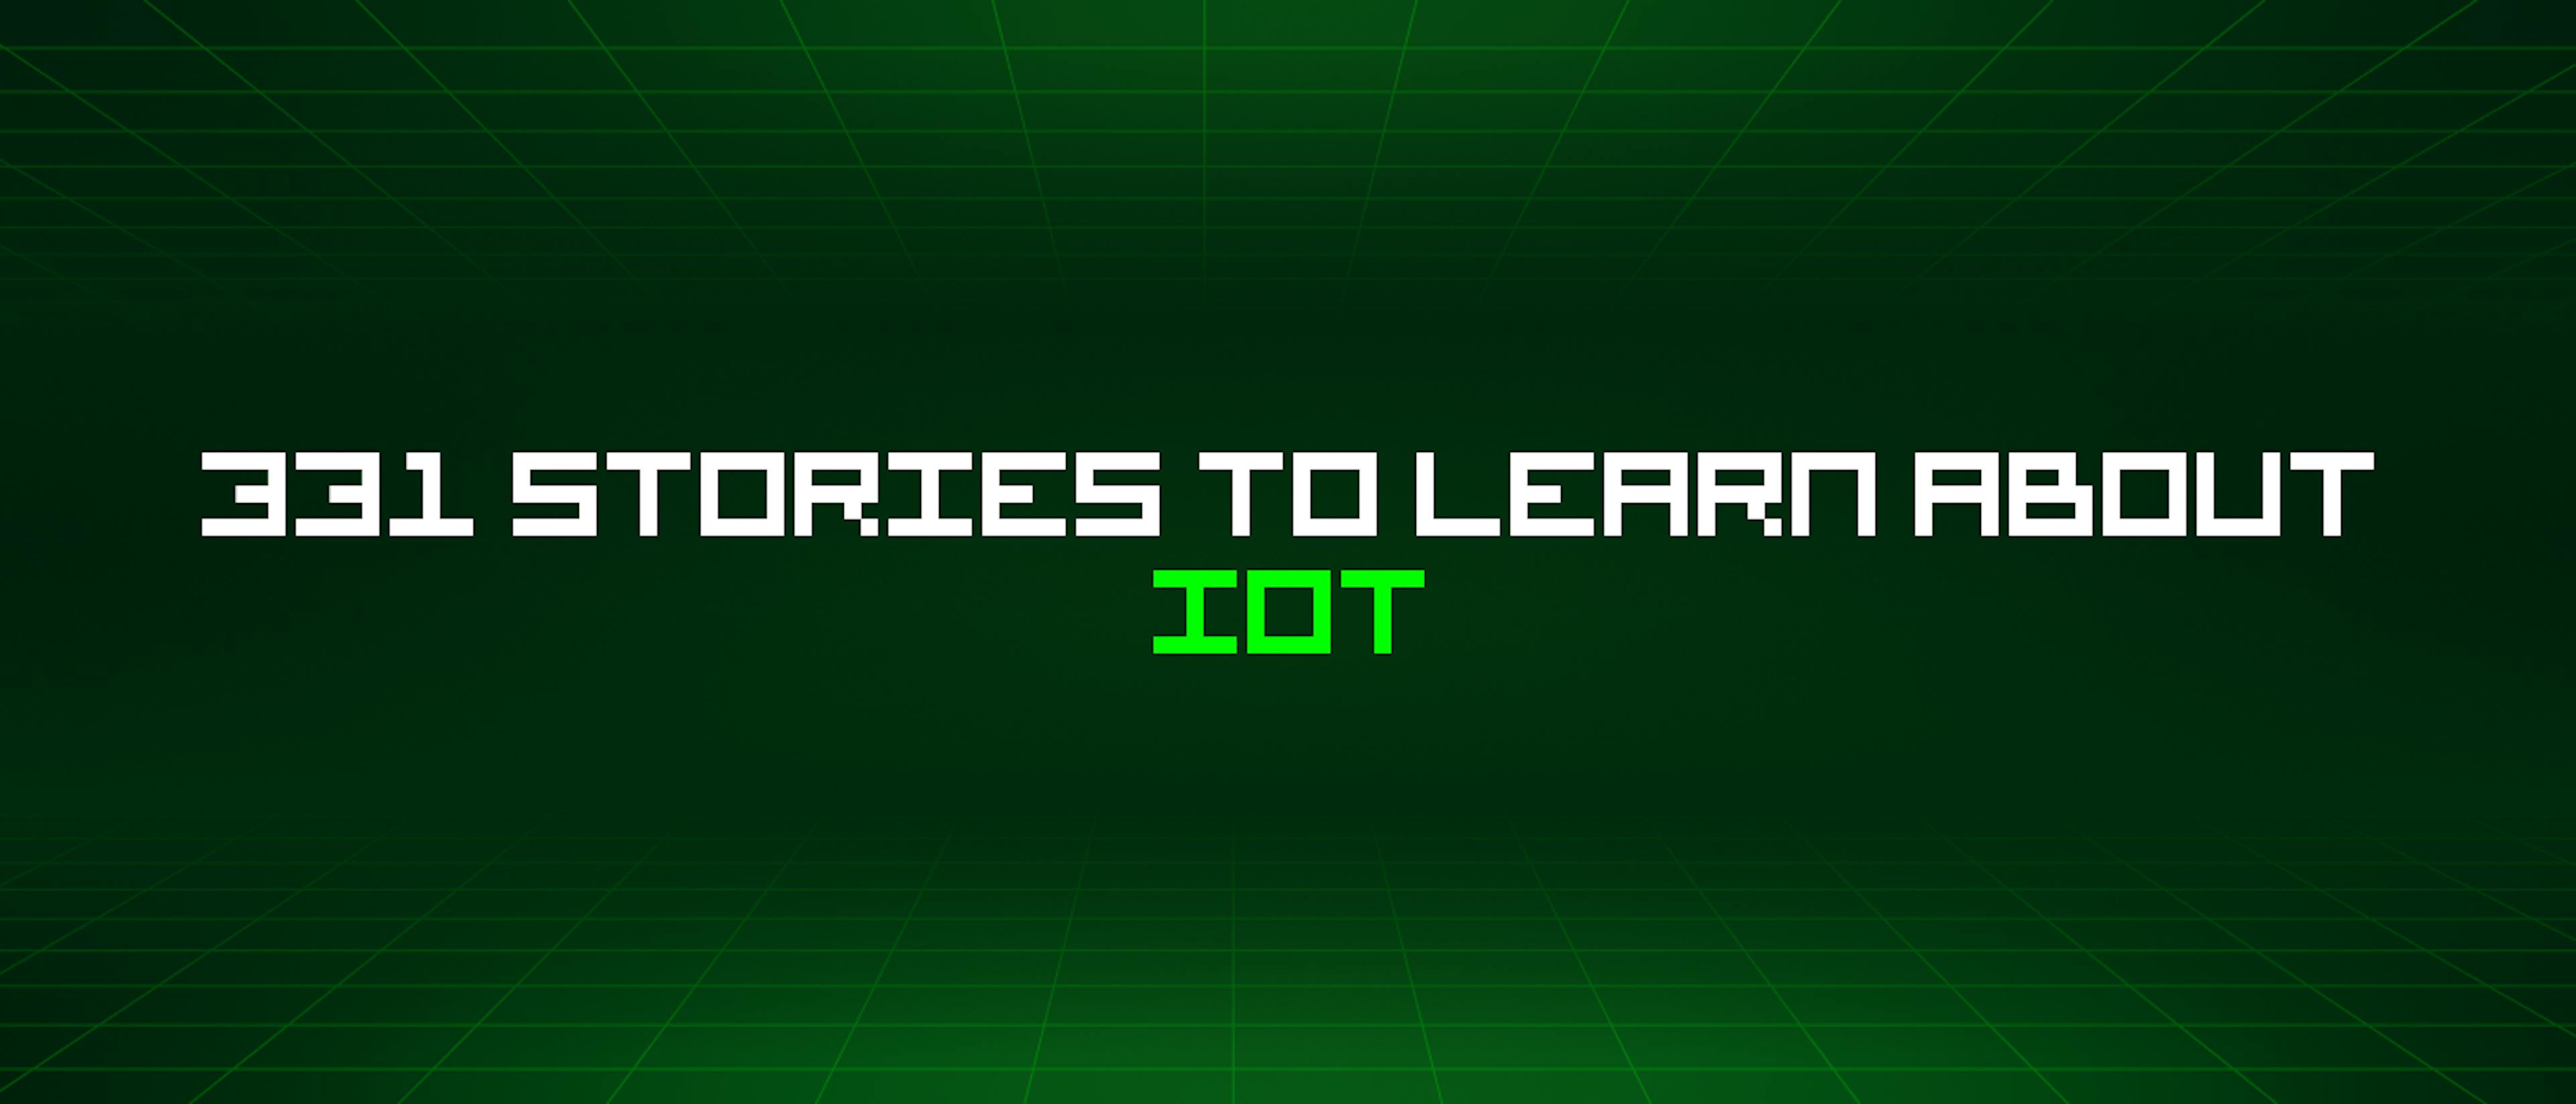 featured image - 331 Stories To Learn About Iot